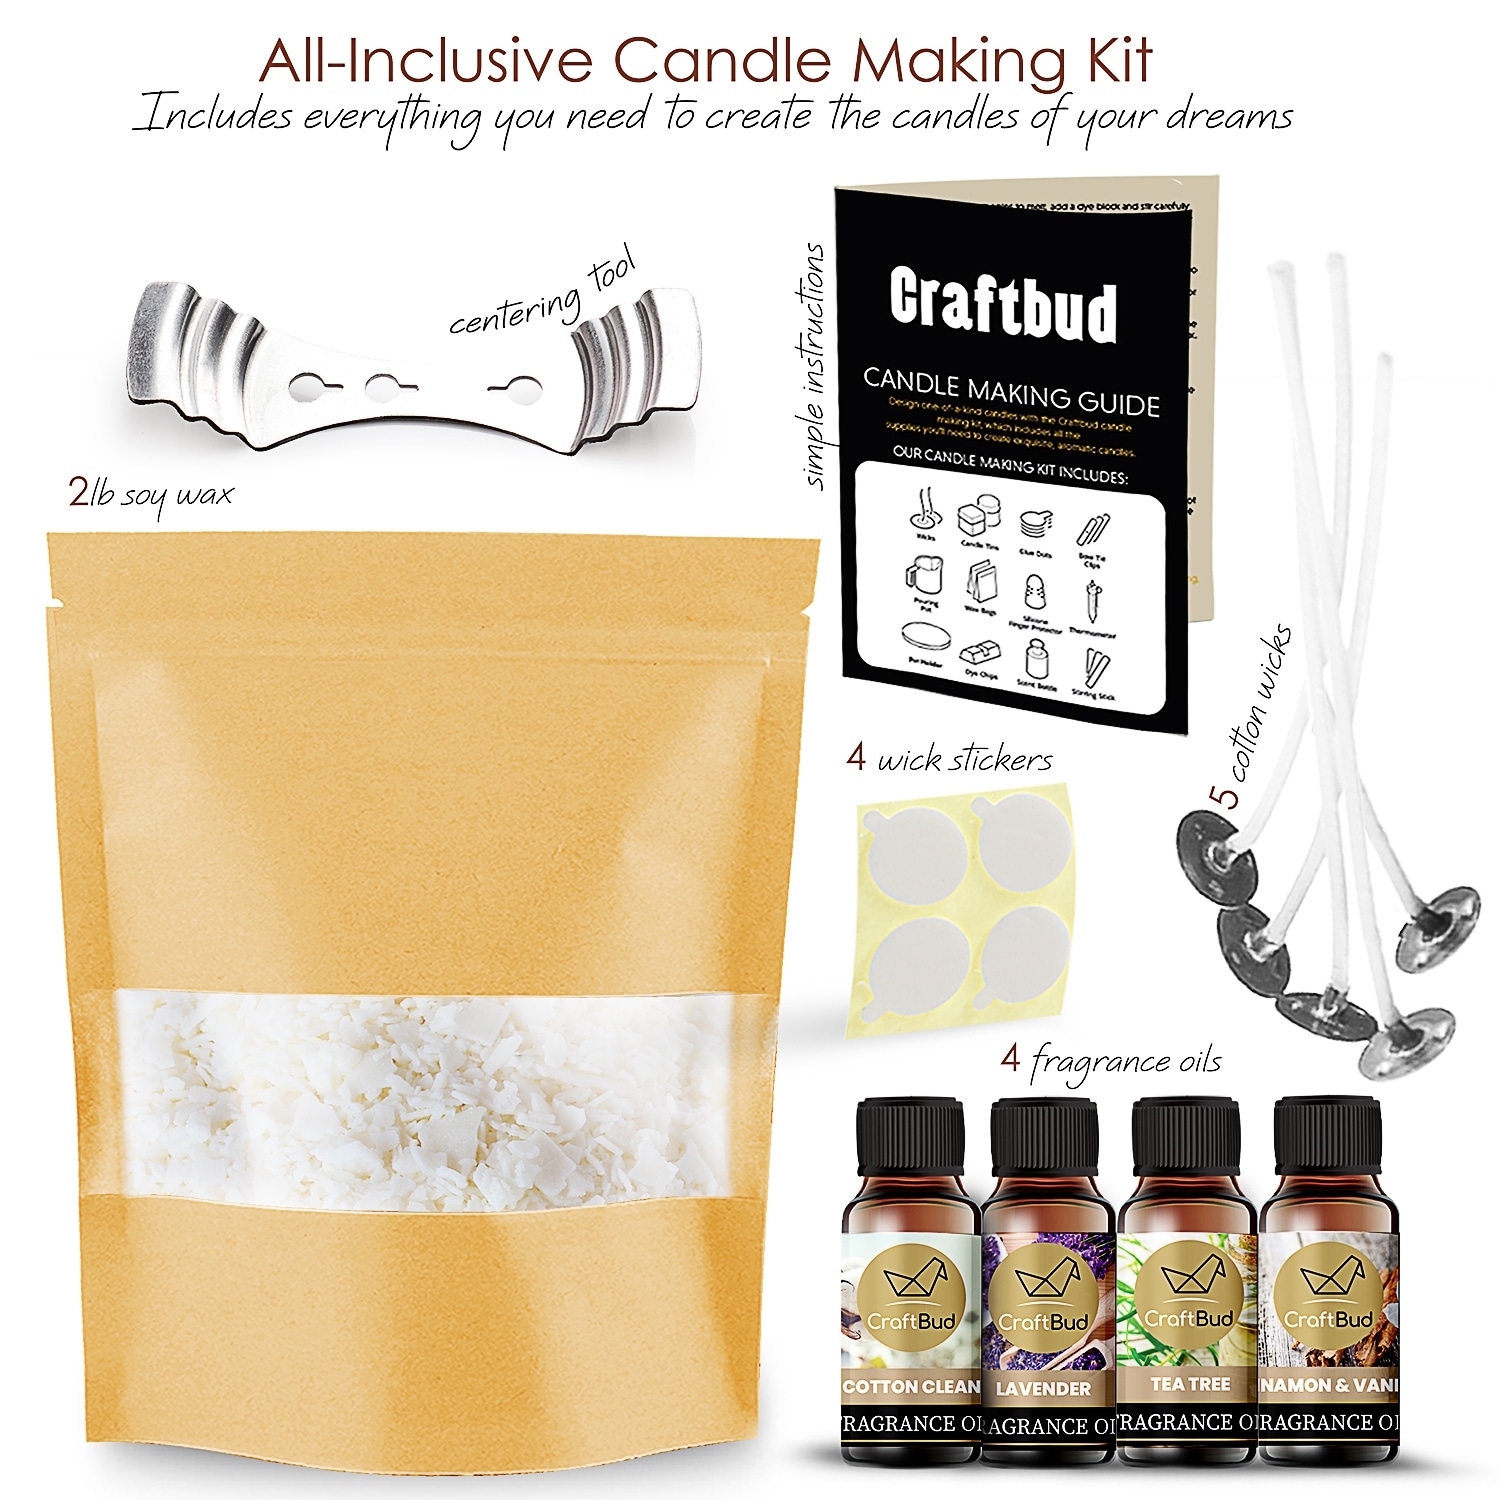  Nature's Blossom Candle Making Kit for Beginners - DIY Candle  Making Supplies, Scented Candles with Soy Wax, Wicks, 3 Fragrances, Melting  Pot, Tin Jars & Starter Guide, Craft Kits for Adults